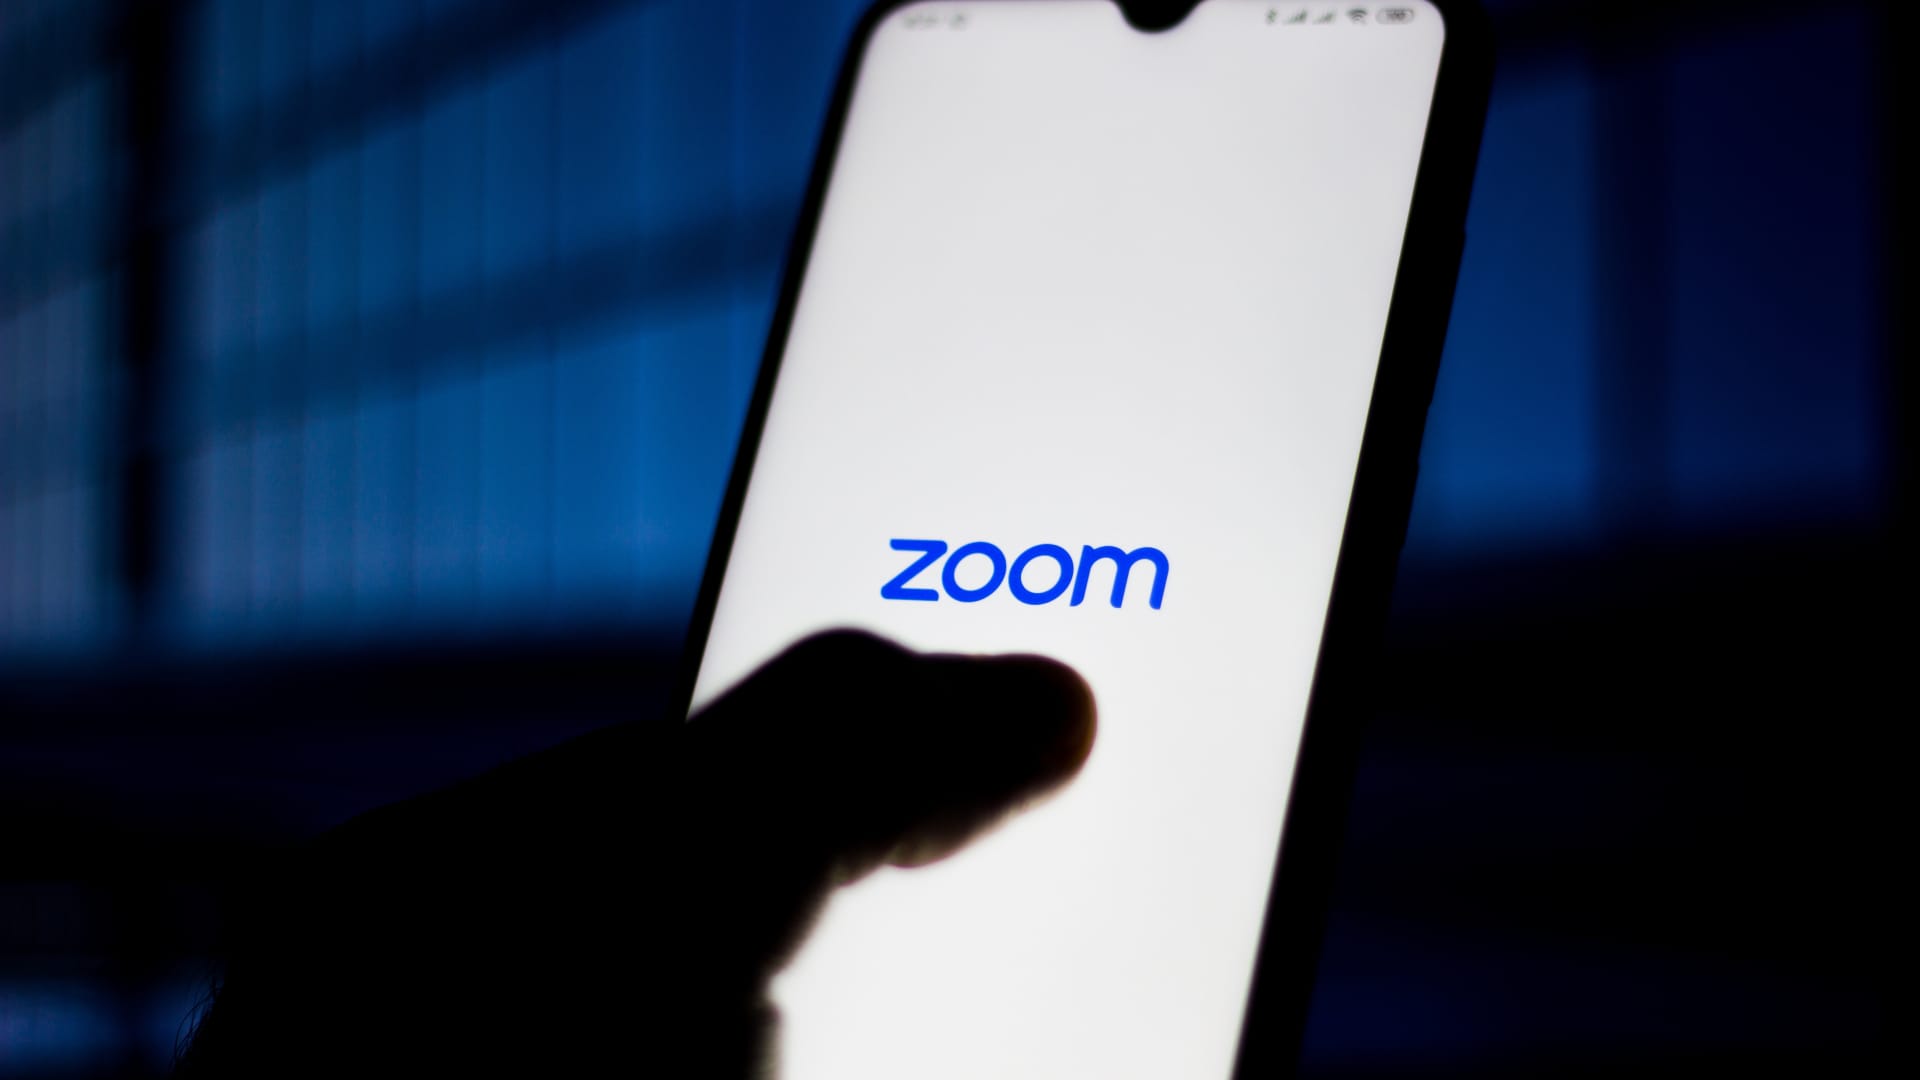 Zoom optimistic about growth in Asia Pacific despite weaker outlook